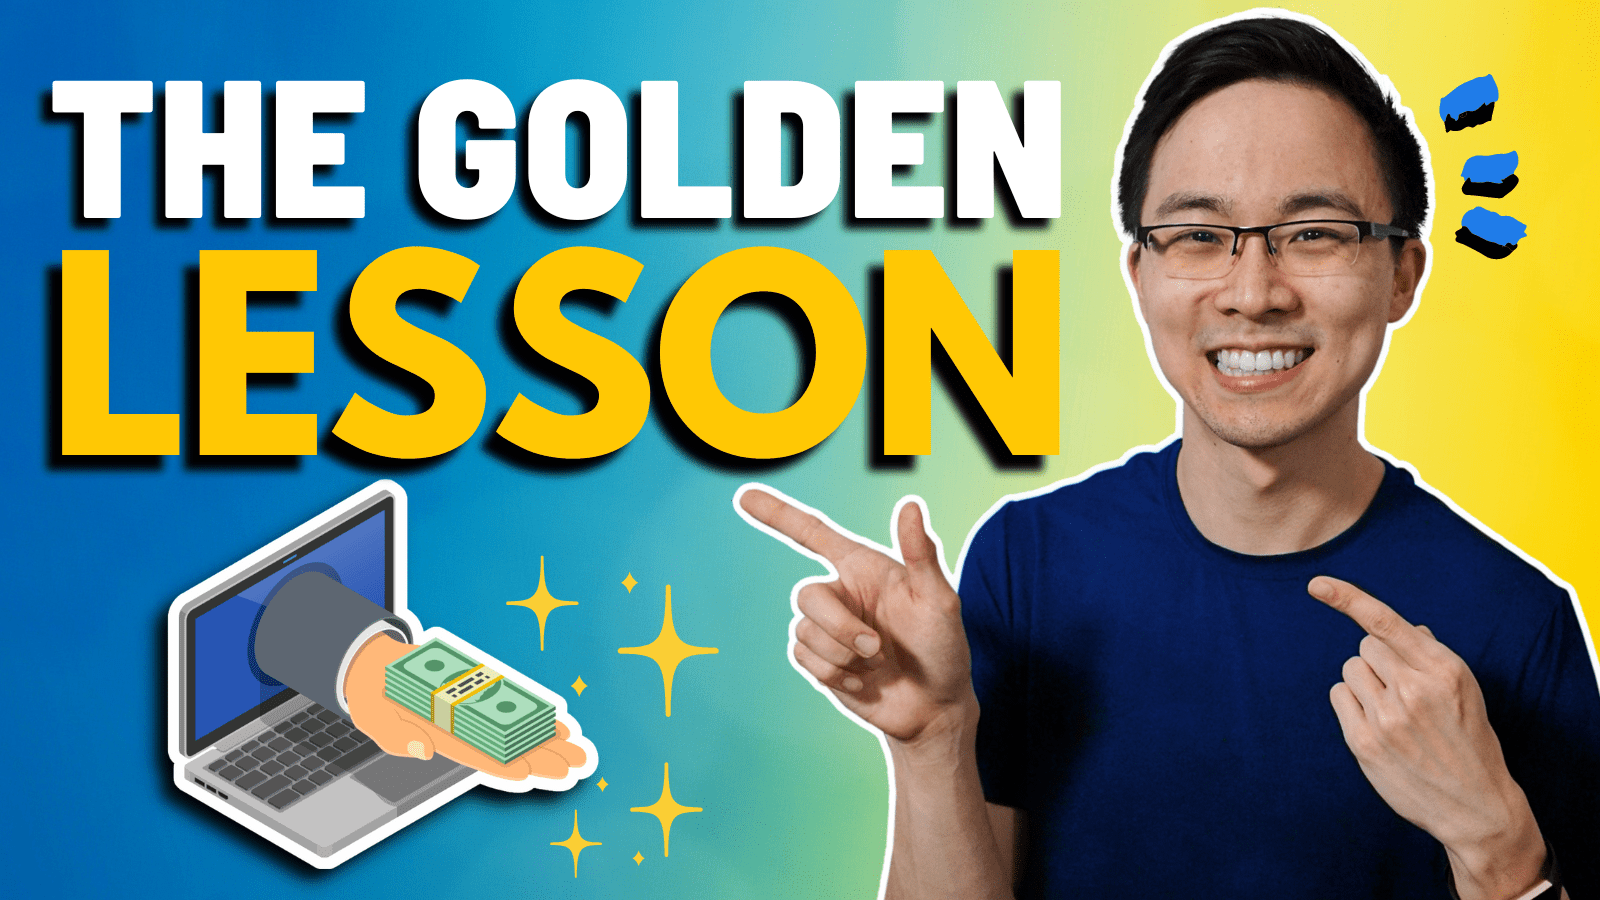 I Made $1600 on the Internet By Taking this Lesson to Heart